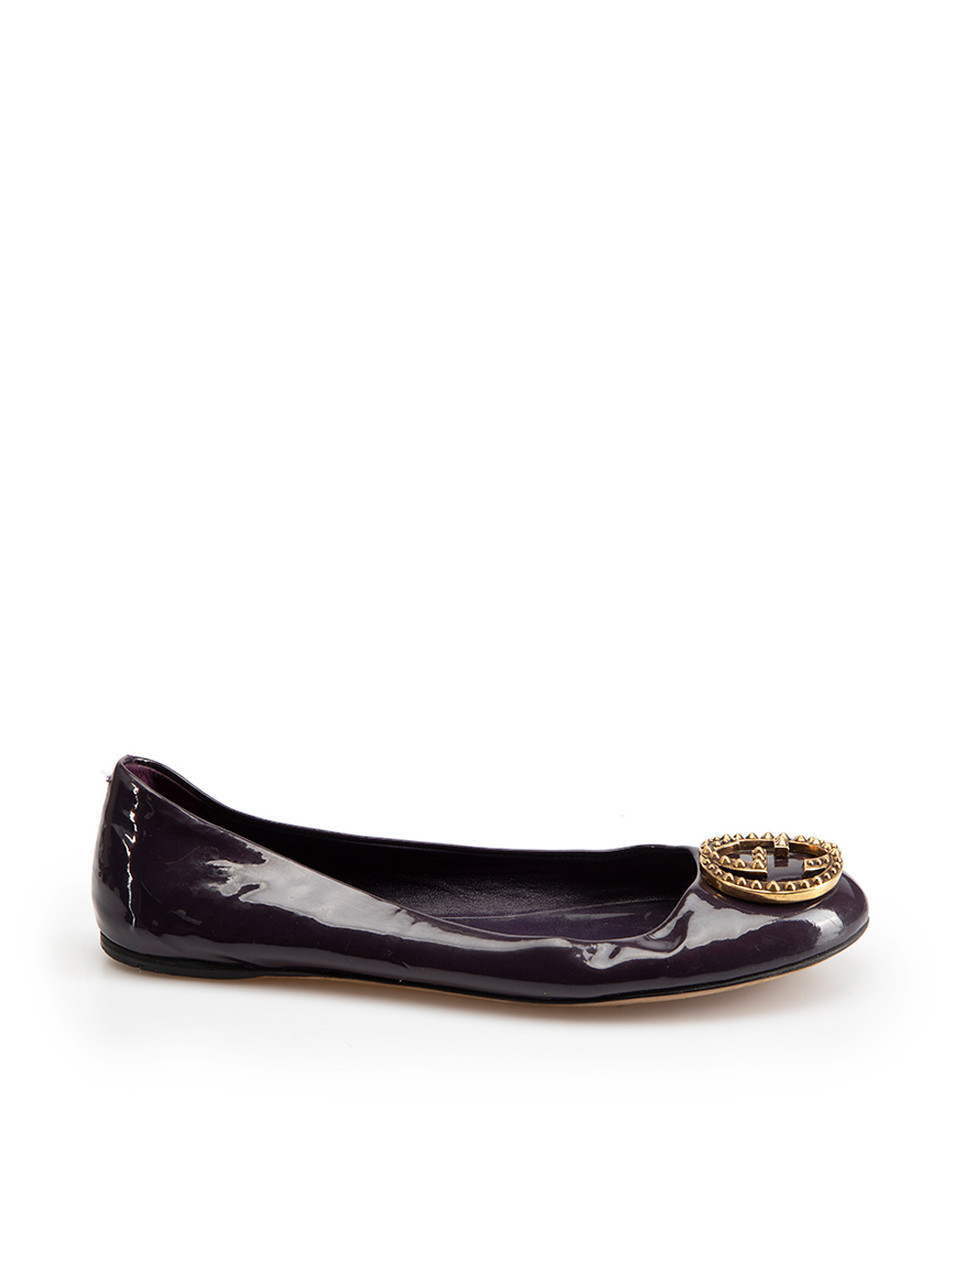 Used Gucci Purple Patent Leather GG Ballet Flats